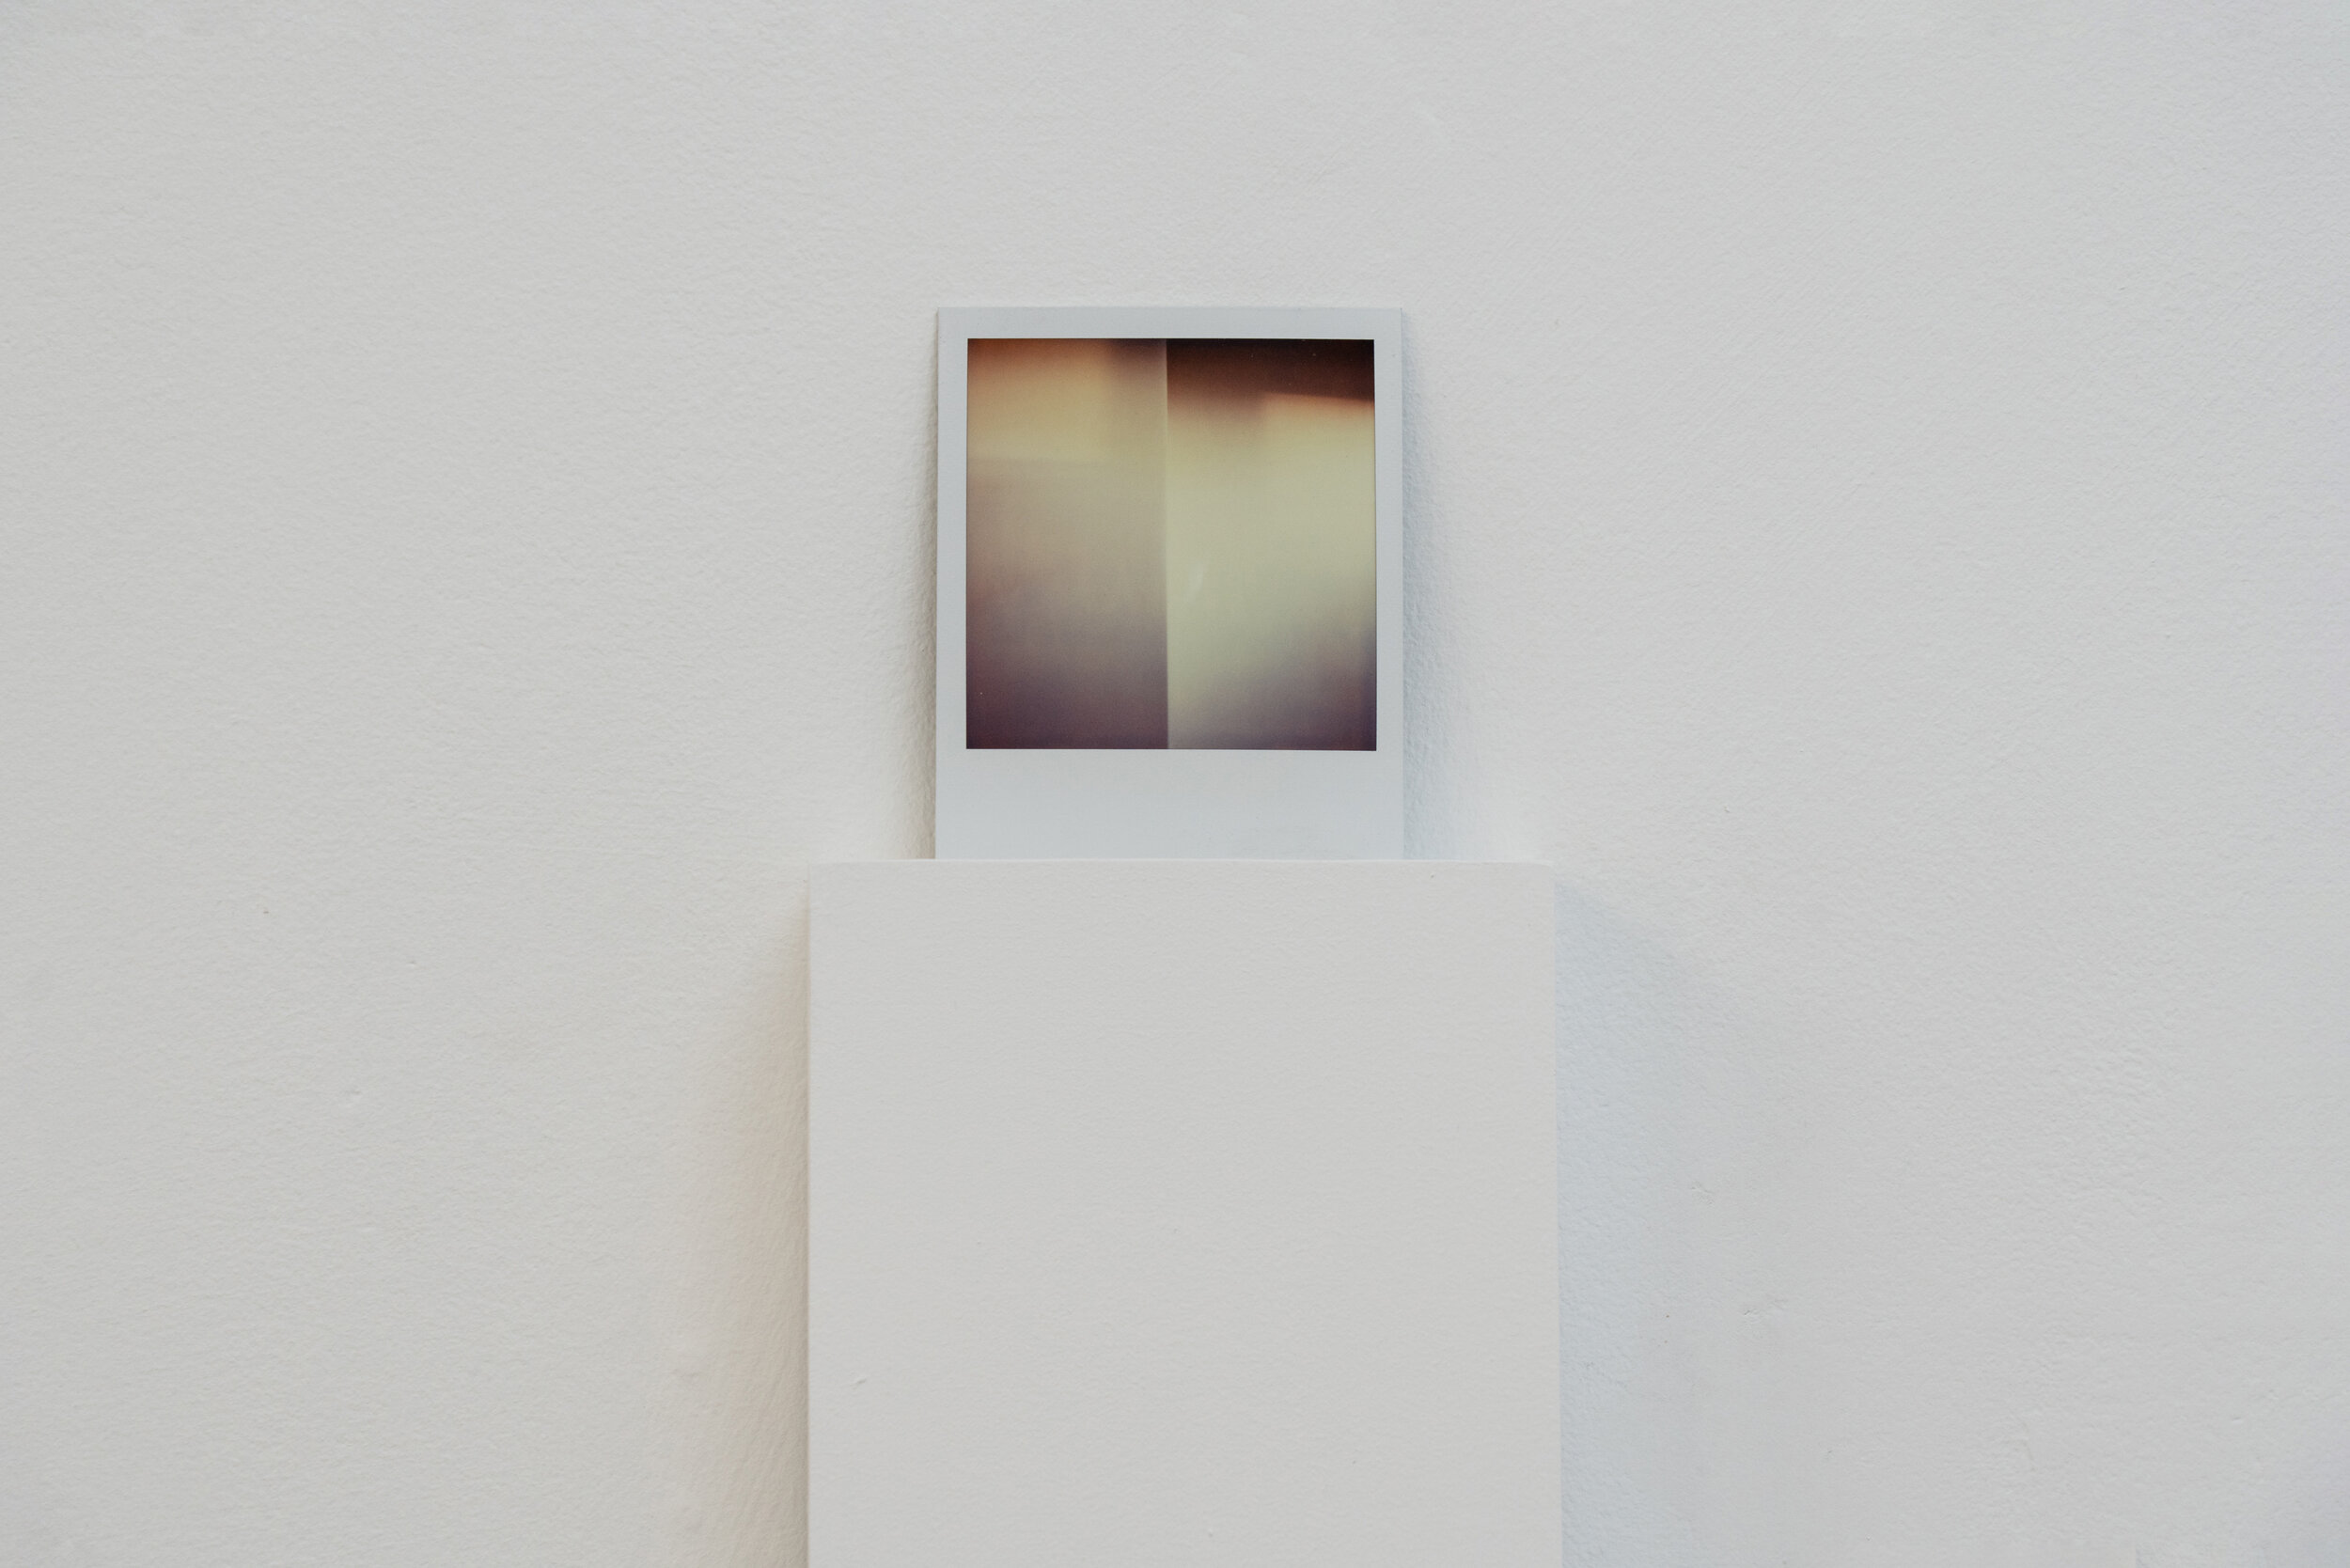   Threshold | Rebeca Bollinger and Léonie Guyer , exhibition, 2020   Untitled , (detail), 1993, 2020, Polaroid SX-70, wood, latex paint, 64 1/2 x 5 1/2 x 8 inches. Photo credit: Graham Holoch. 